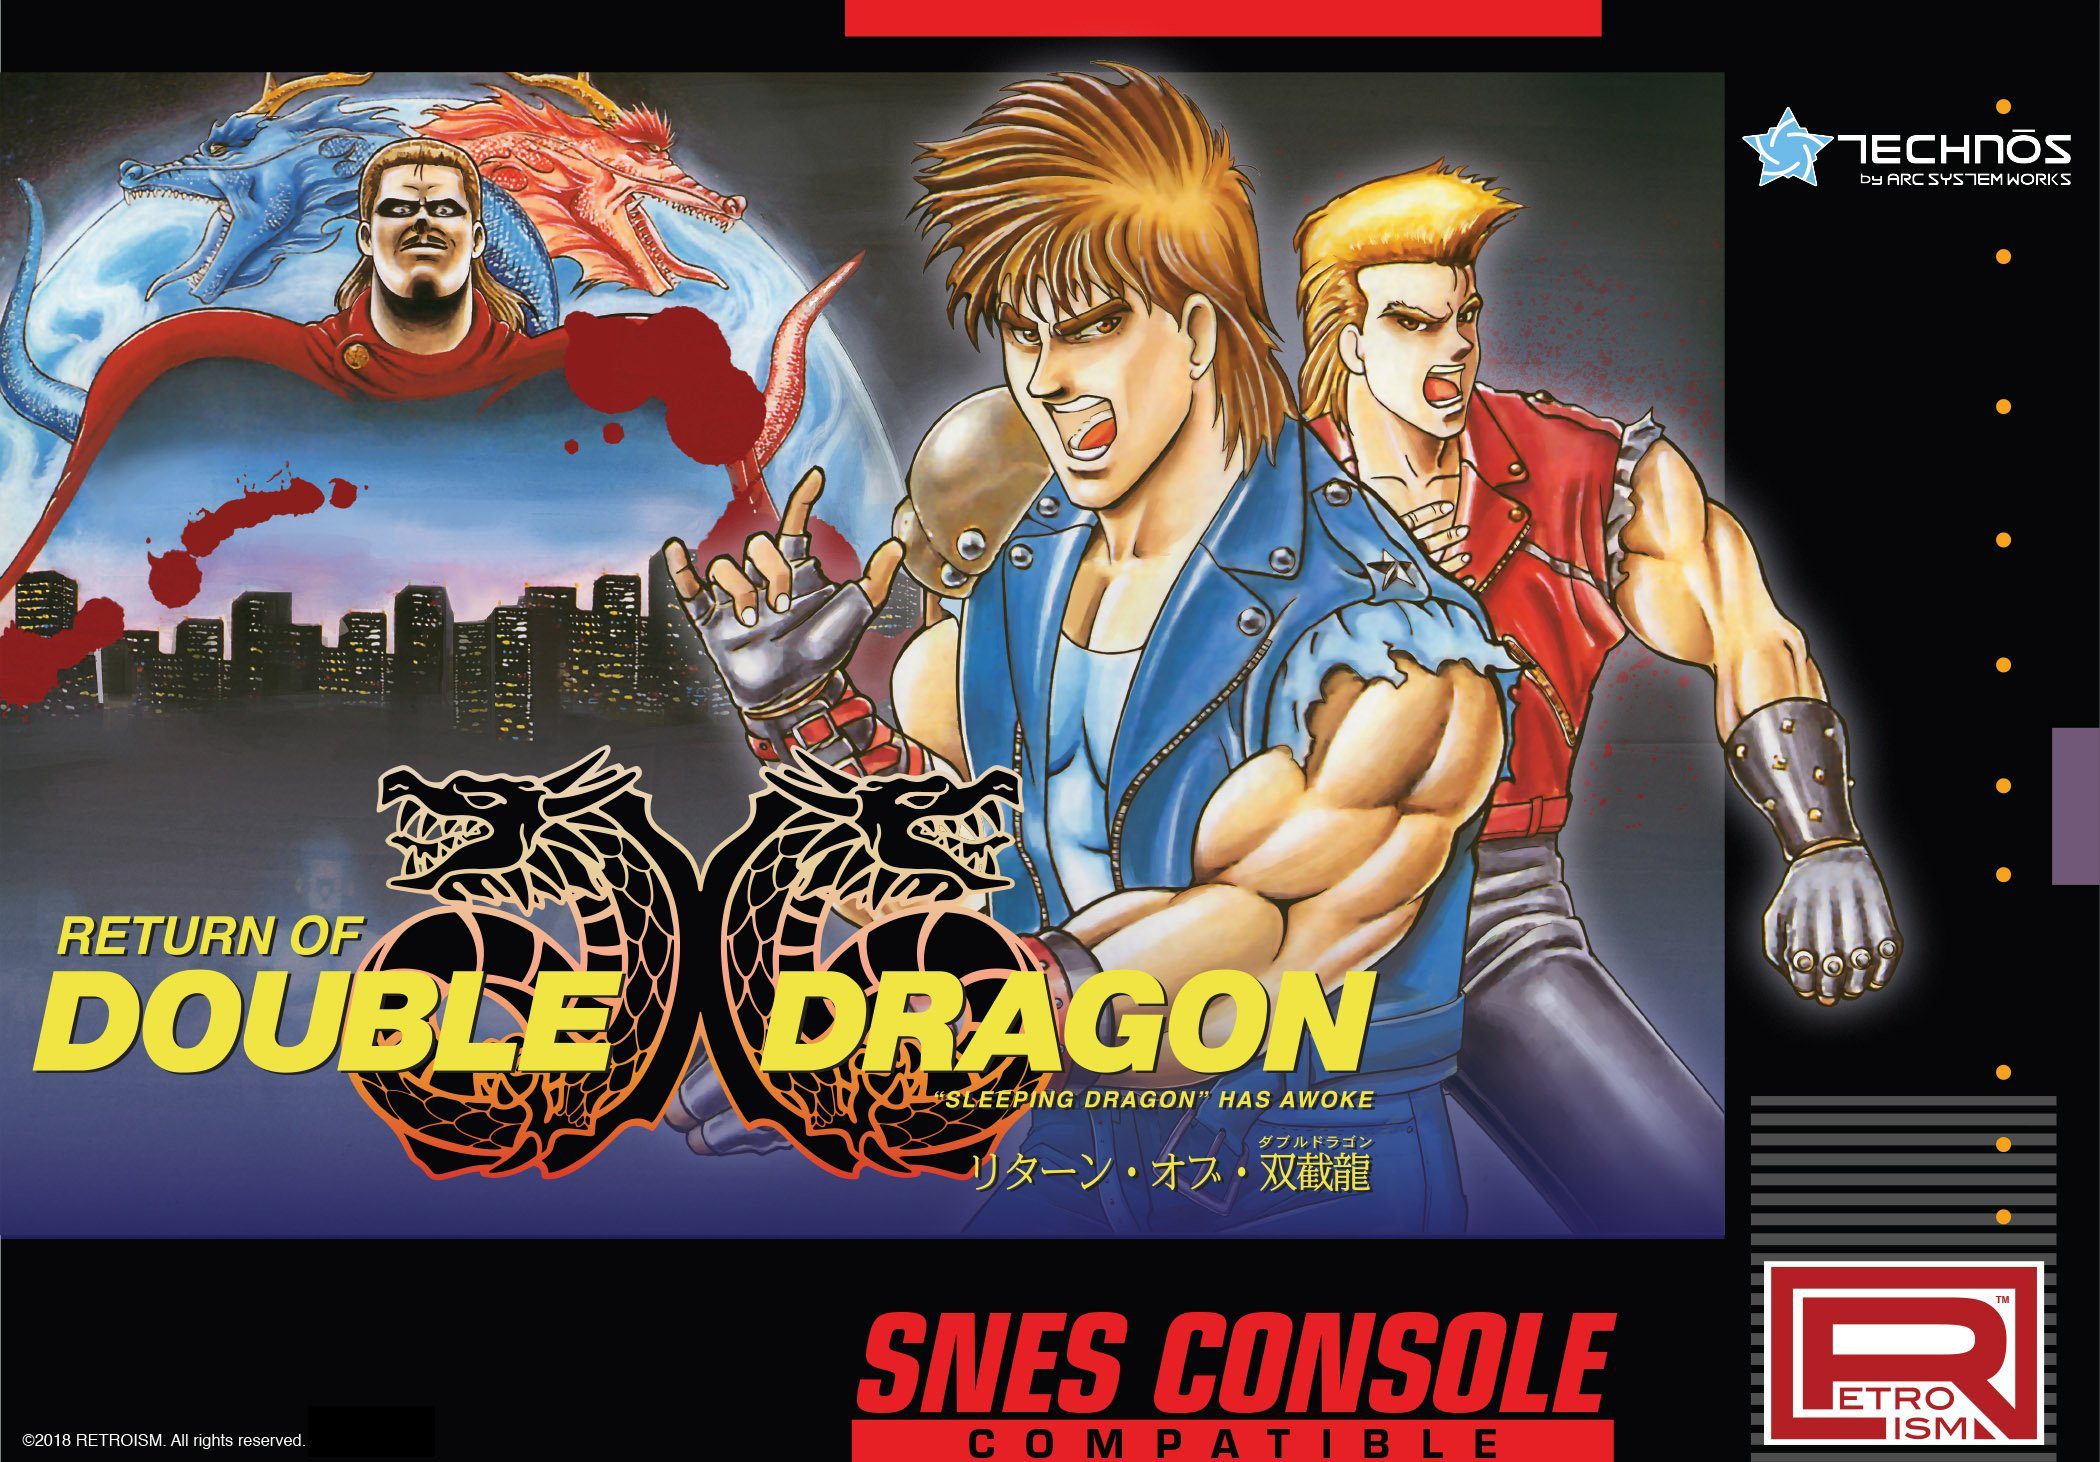 Japanese Only Double Dragon Game finally Makes its Way Stateside